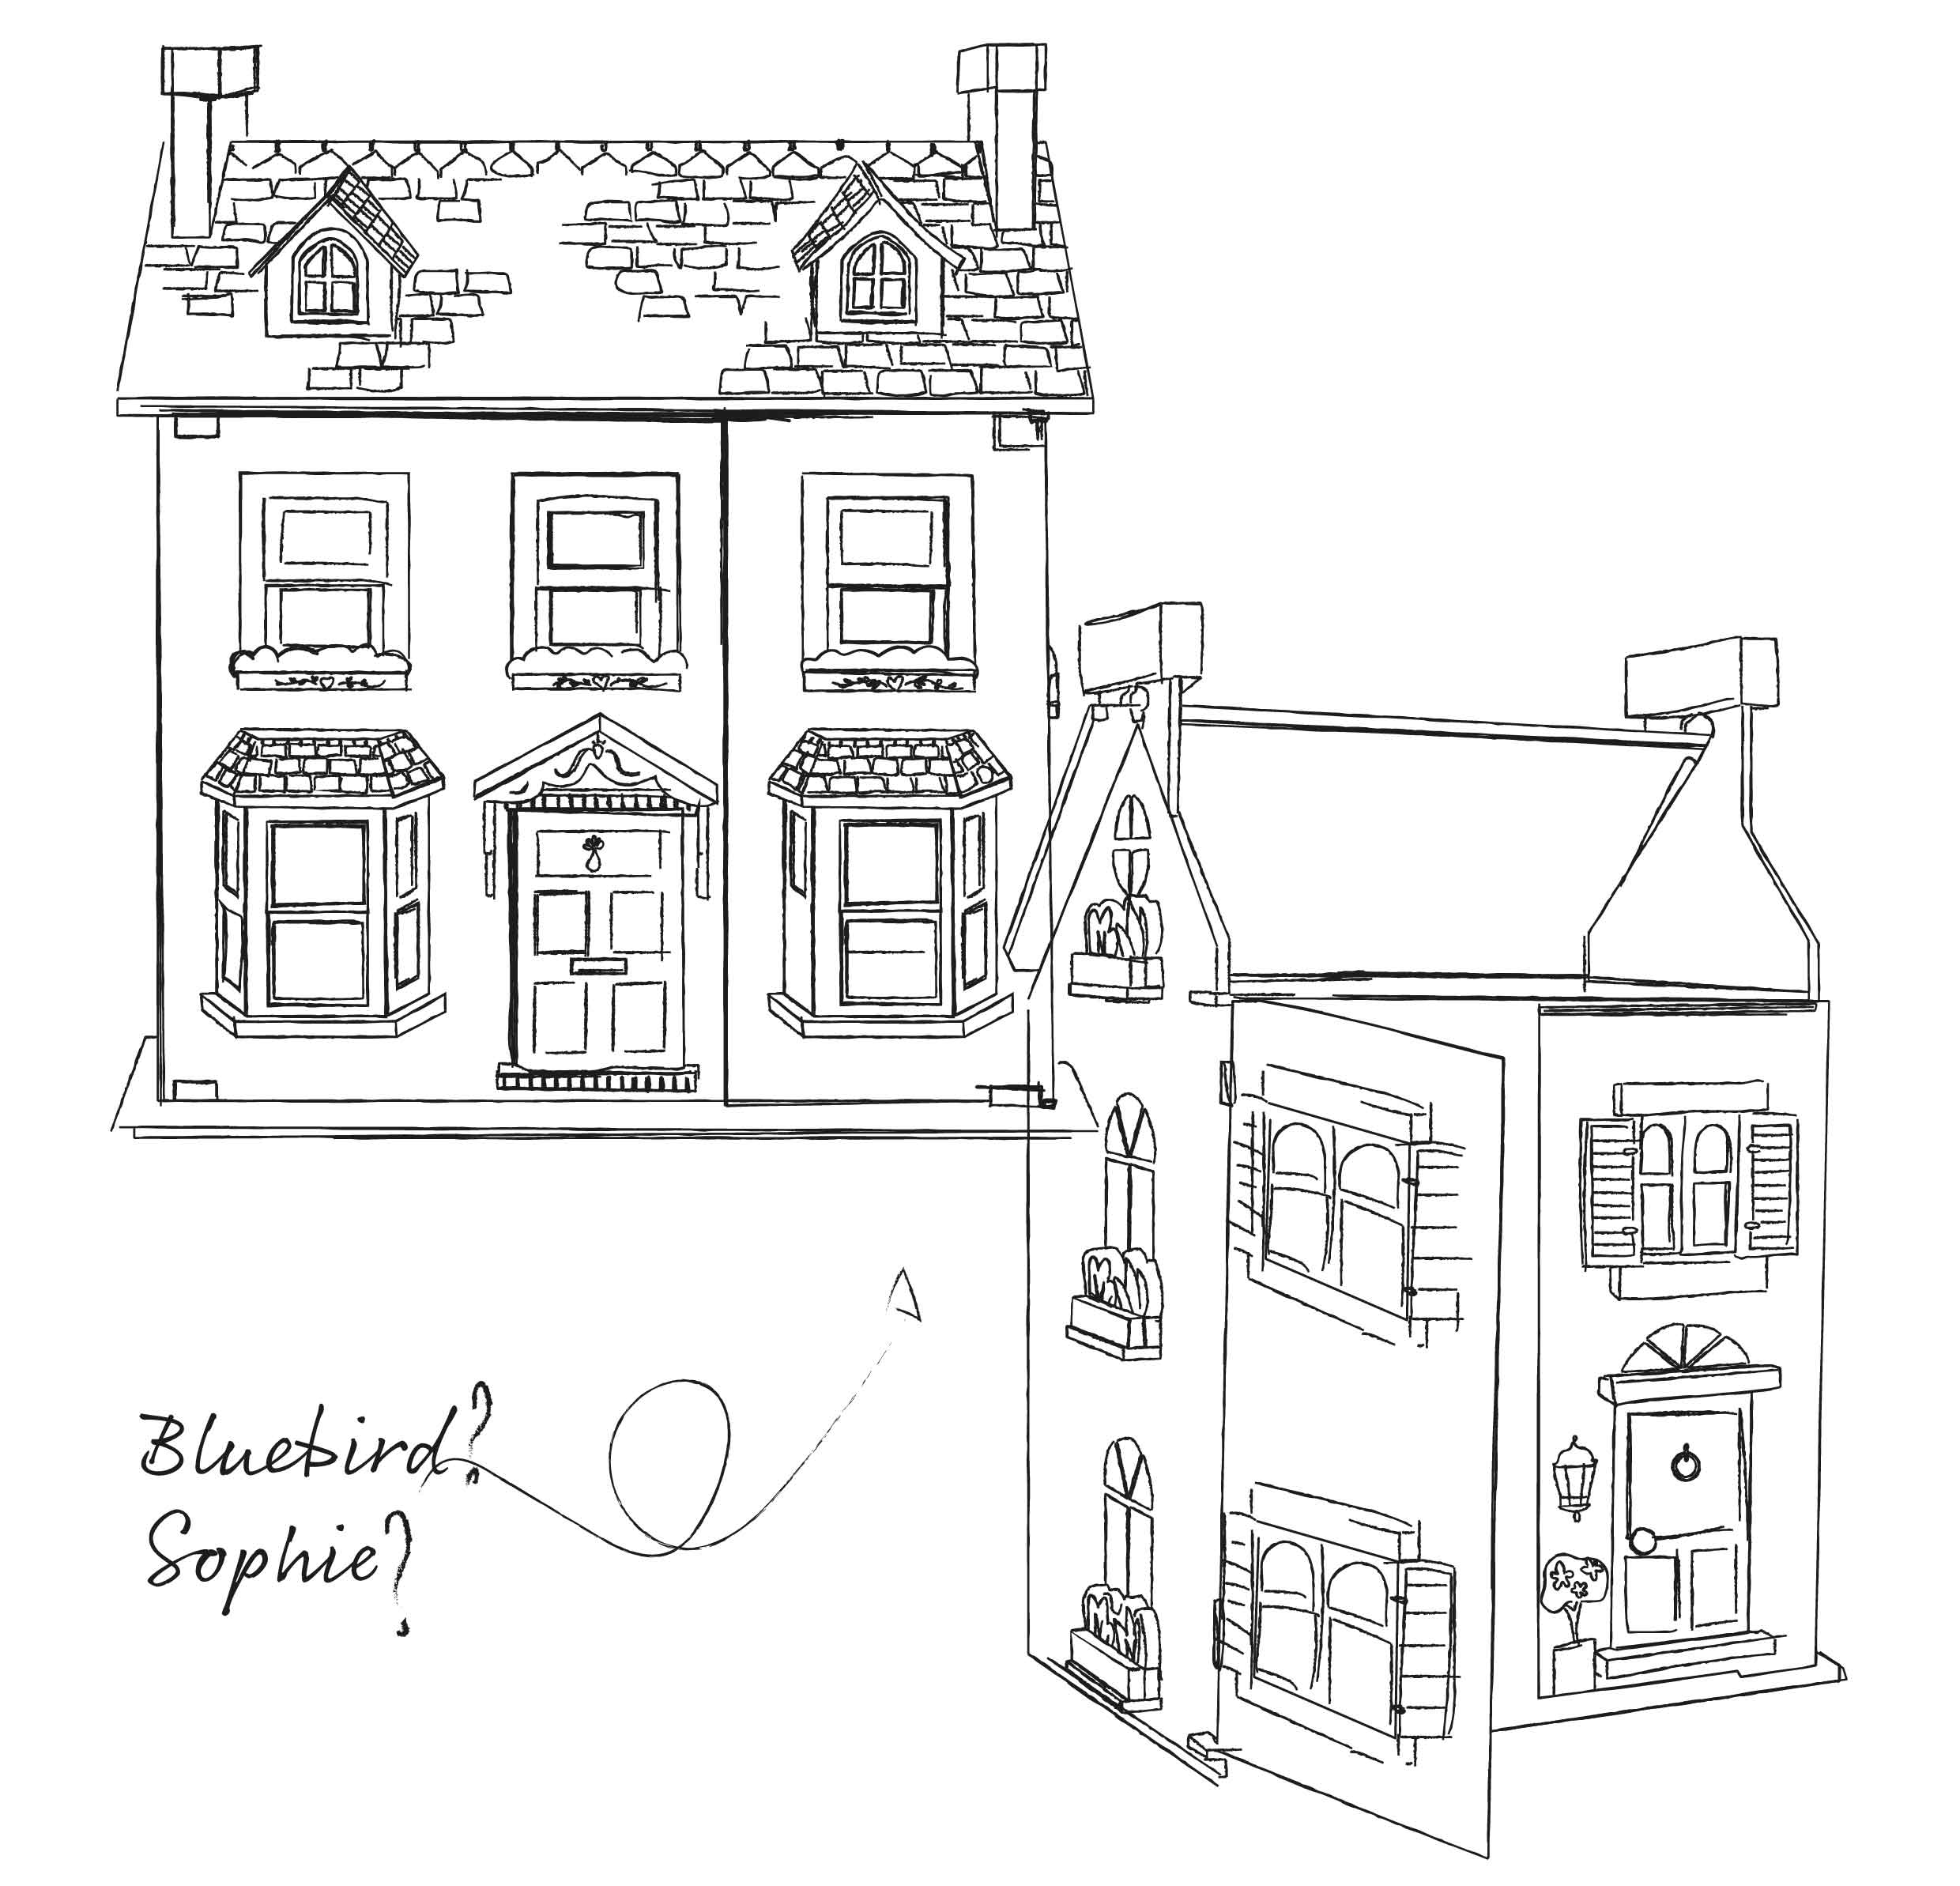 ltv houses illustration with title